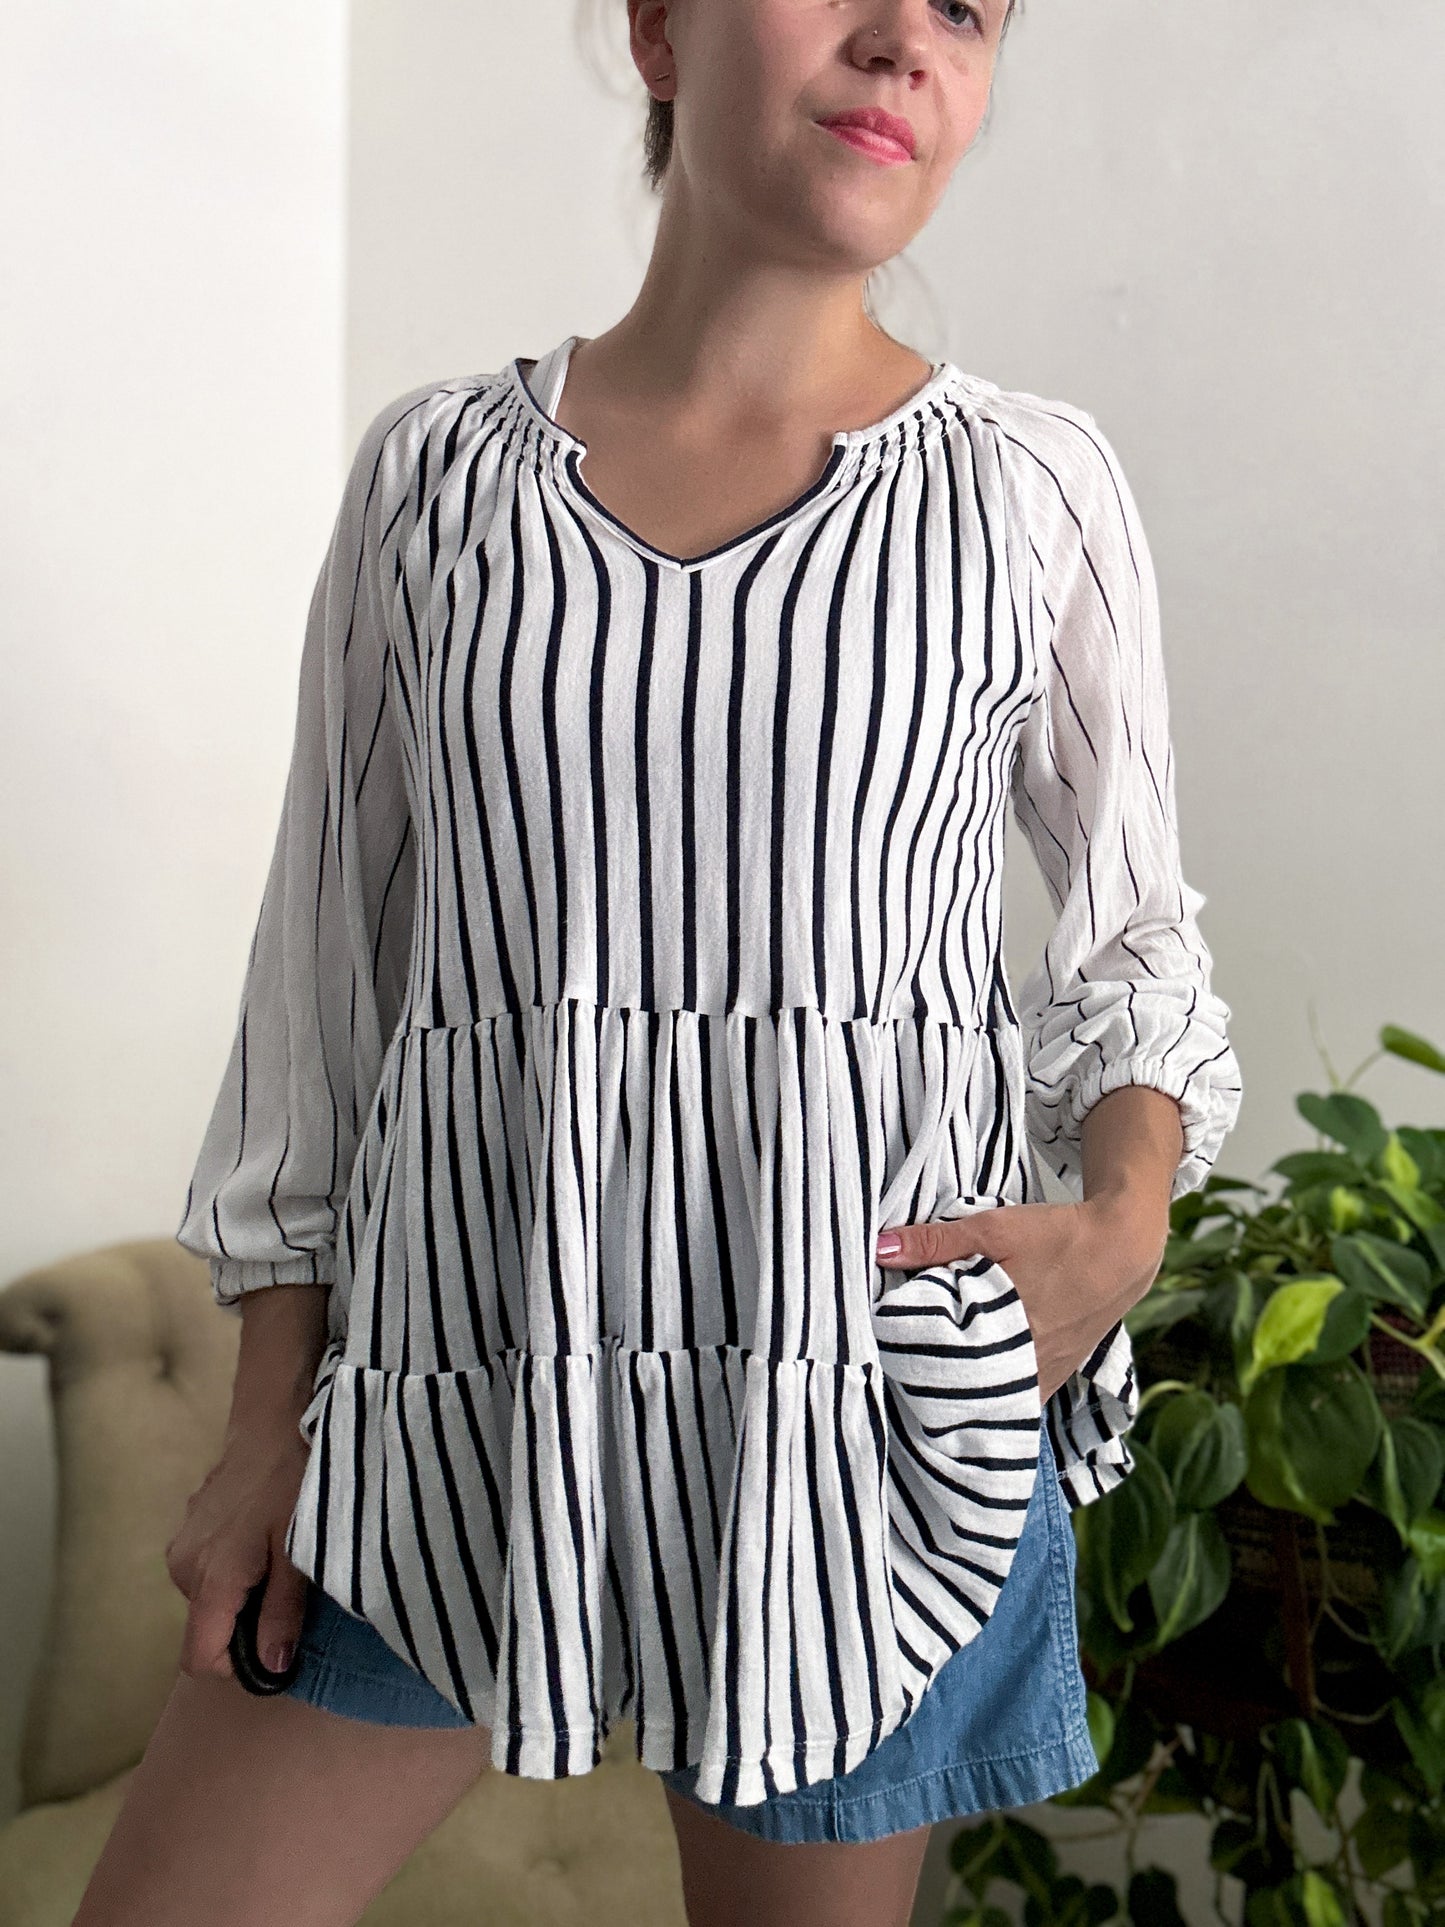 Anthropologie Striped Tiered Swingy Top (fits S)